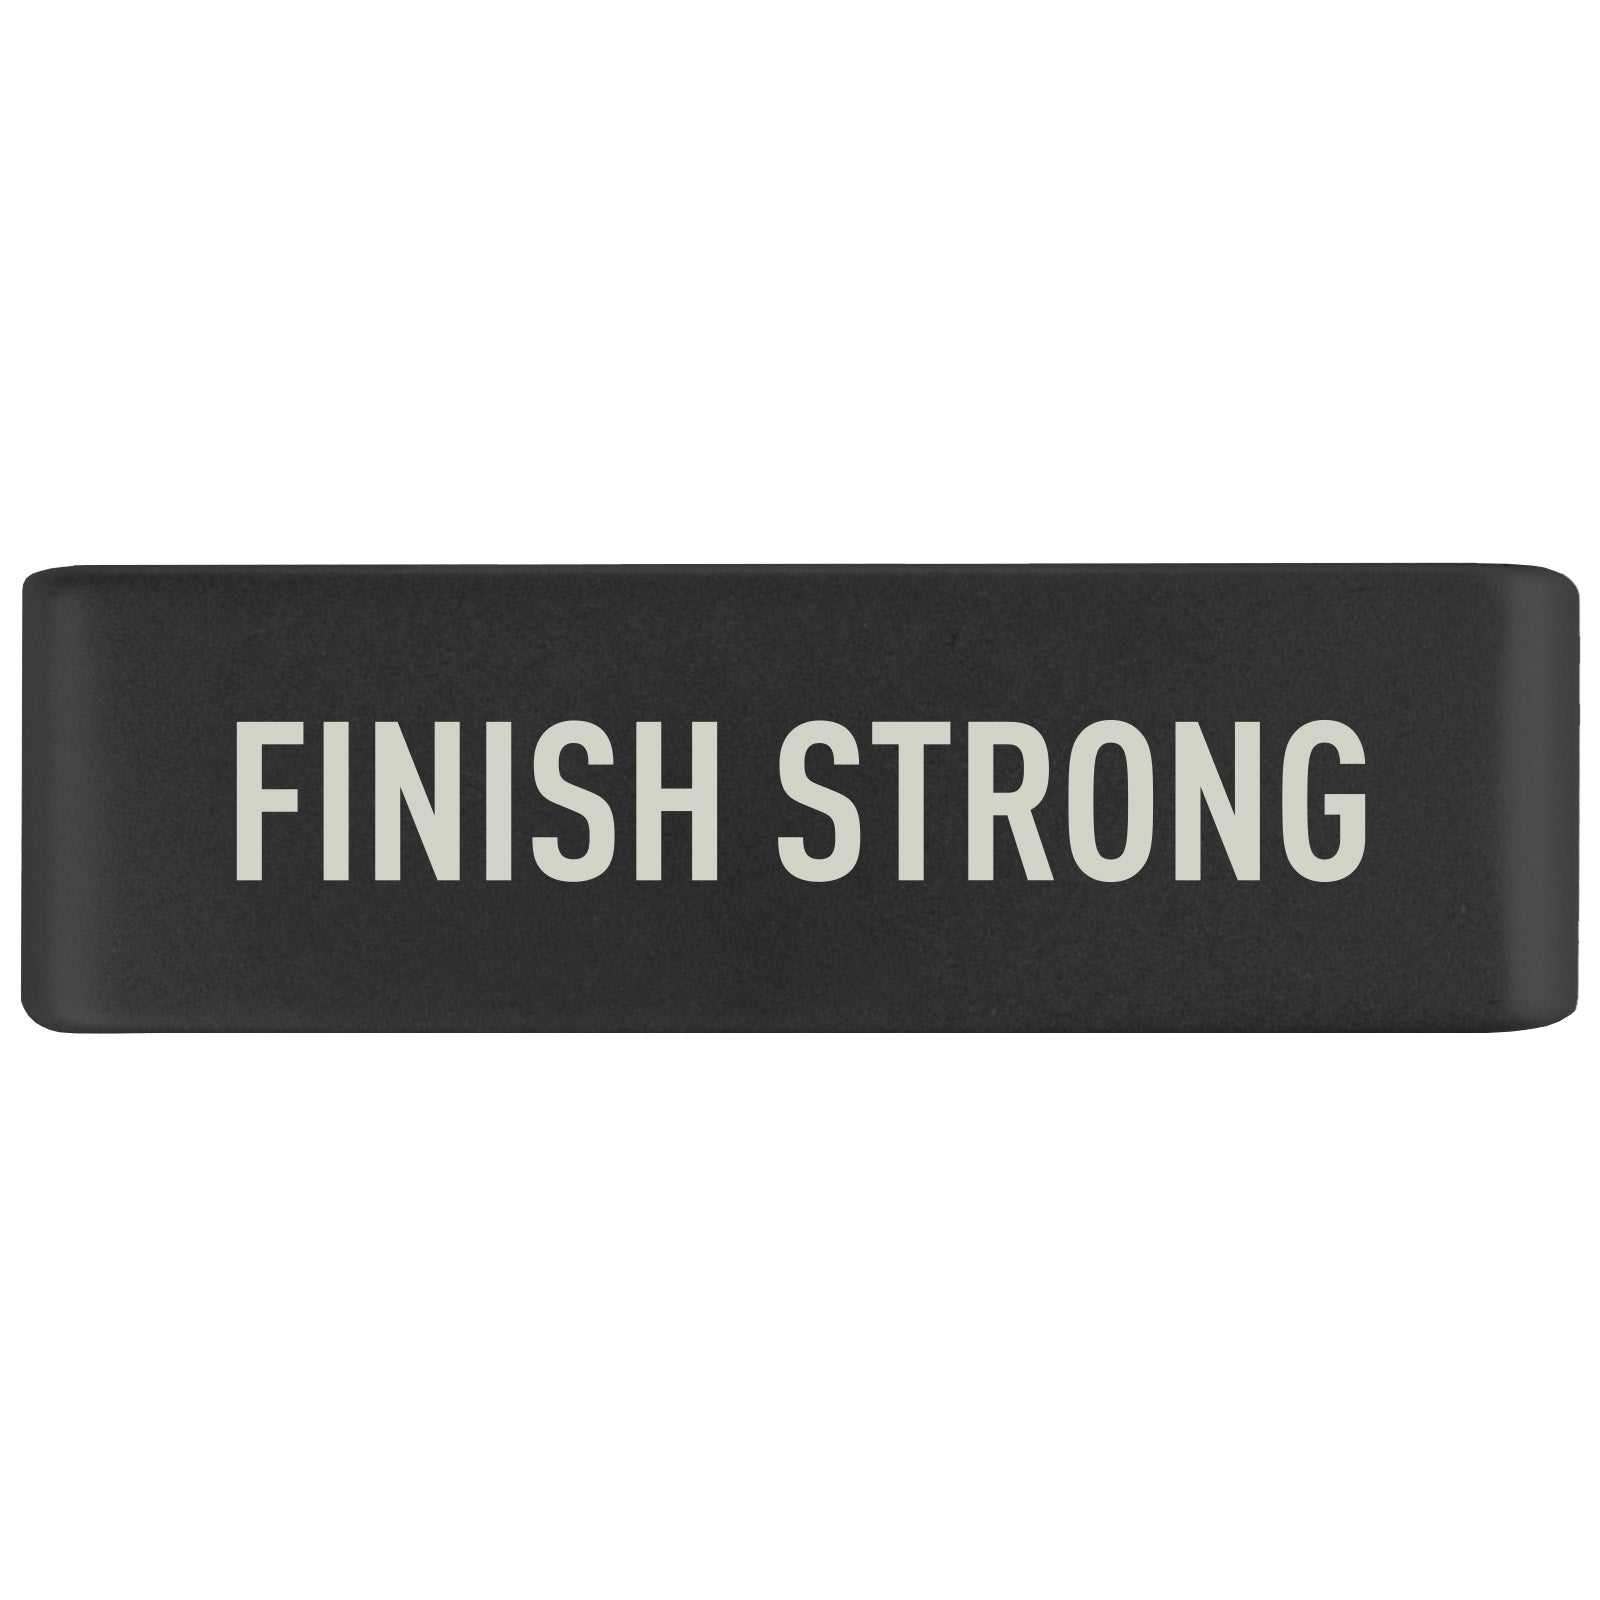 Finish Strong Badge Badge 19mm - ROAD iD